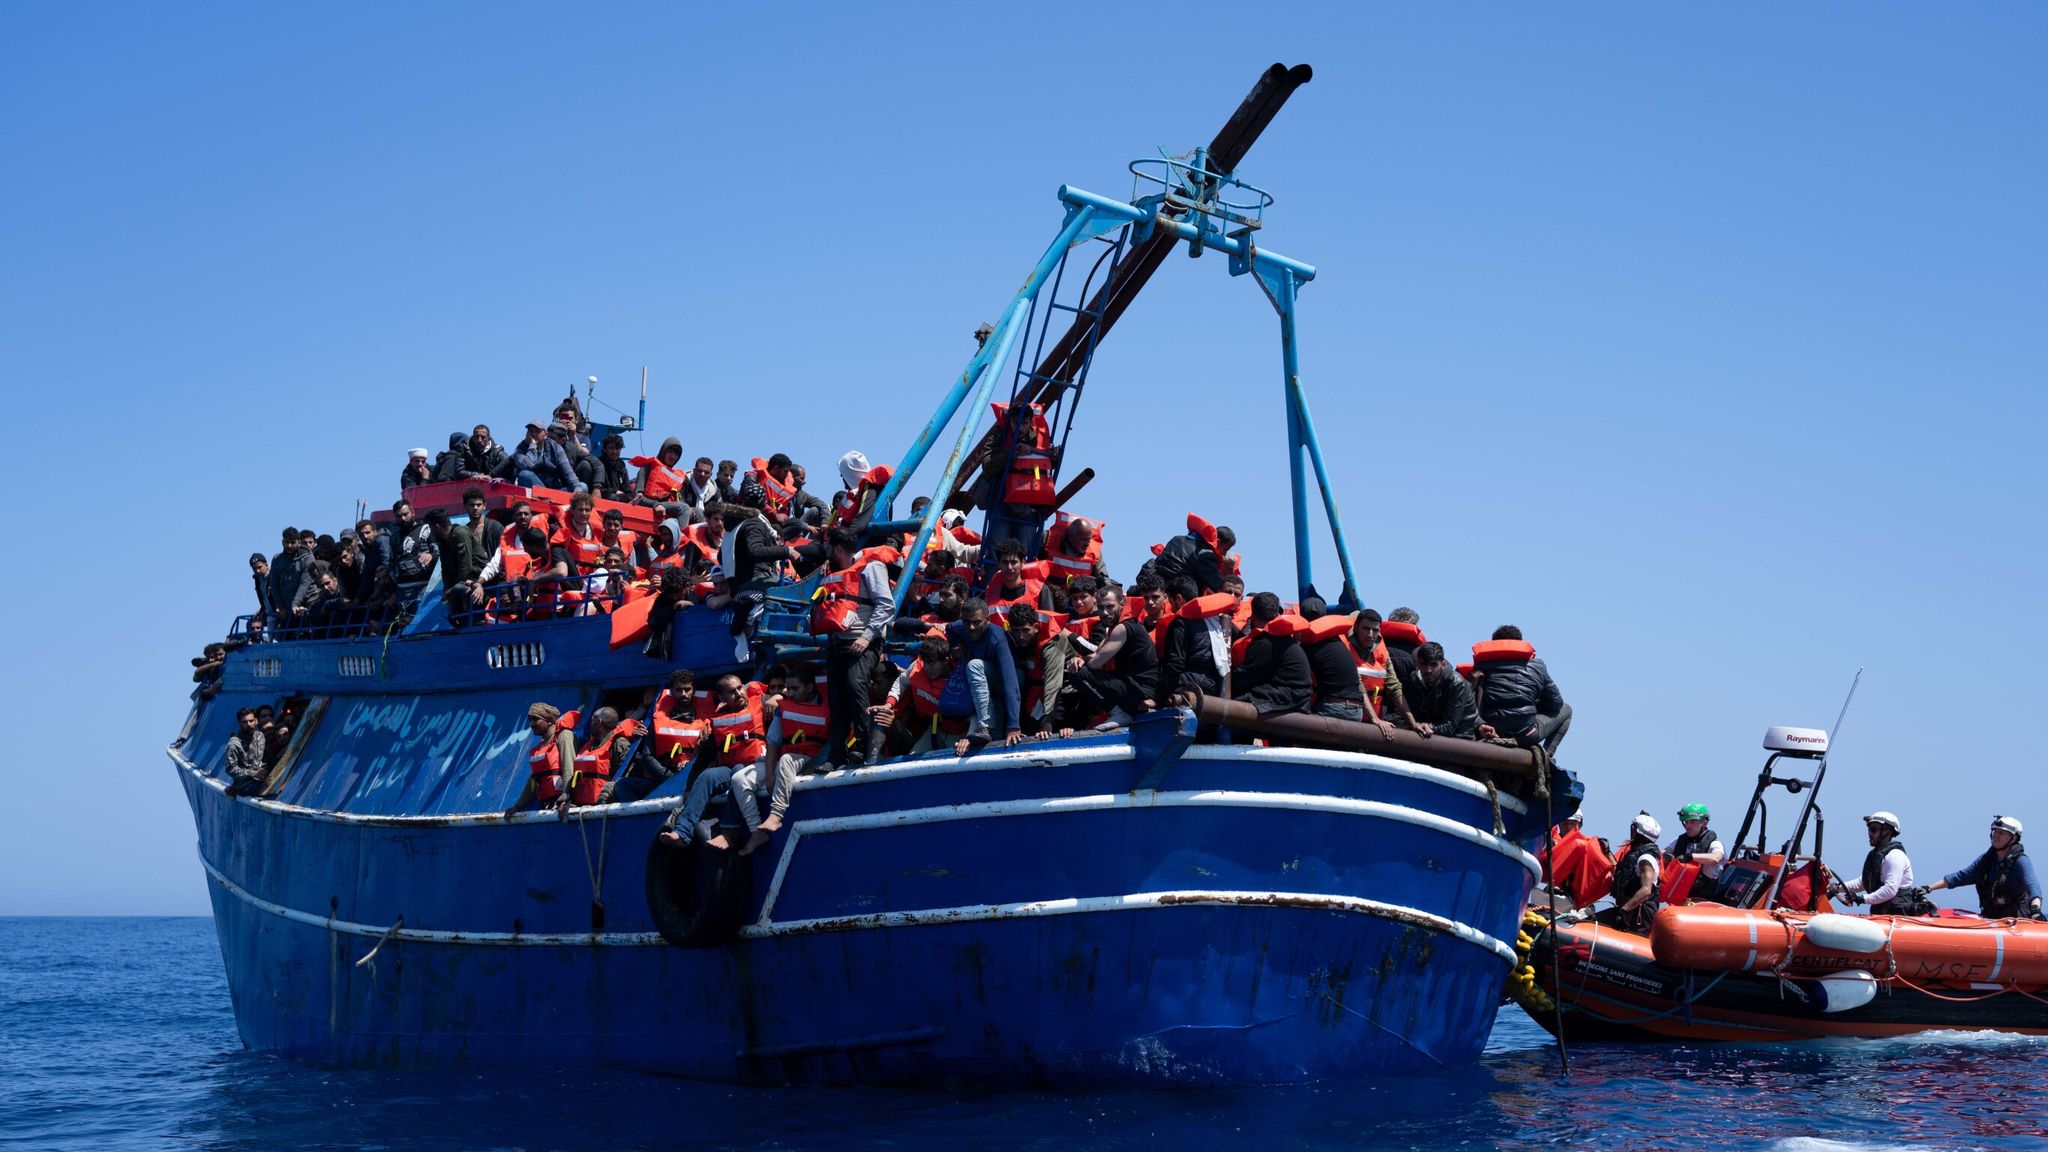 On board the mission to rescue 600 people from overcrowded fishing boat  abandoned by its captain, World News